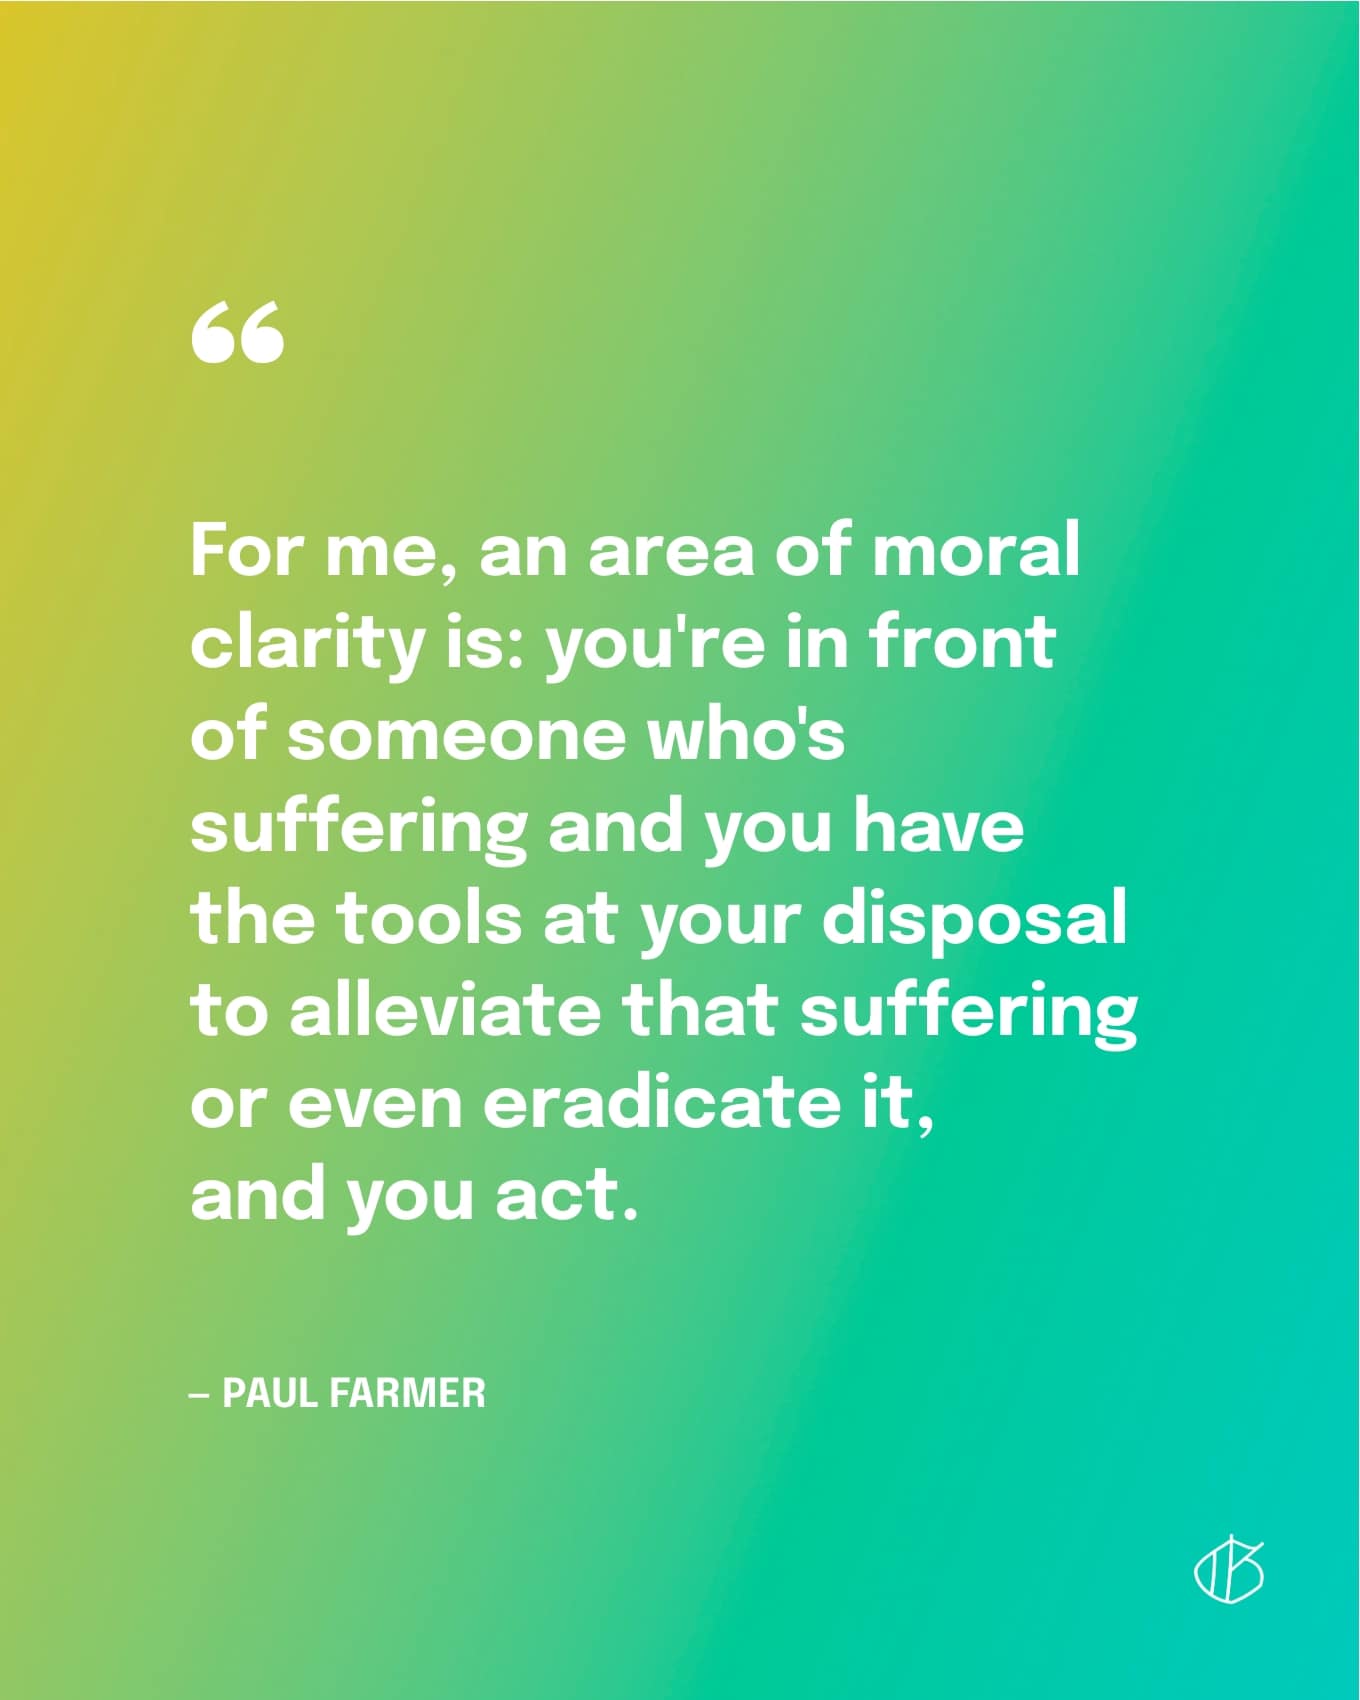 “For me, an area of moral clarity is: you're in front of someone who's suffering and you have the tools at your disposal to alleviate that suffering or even eradicate it, and you act.” — Paul Farmer